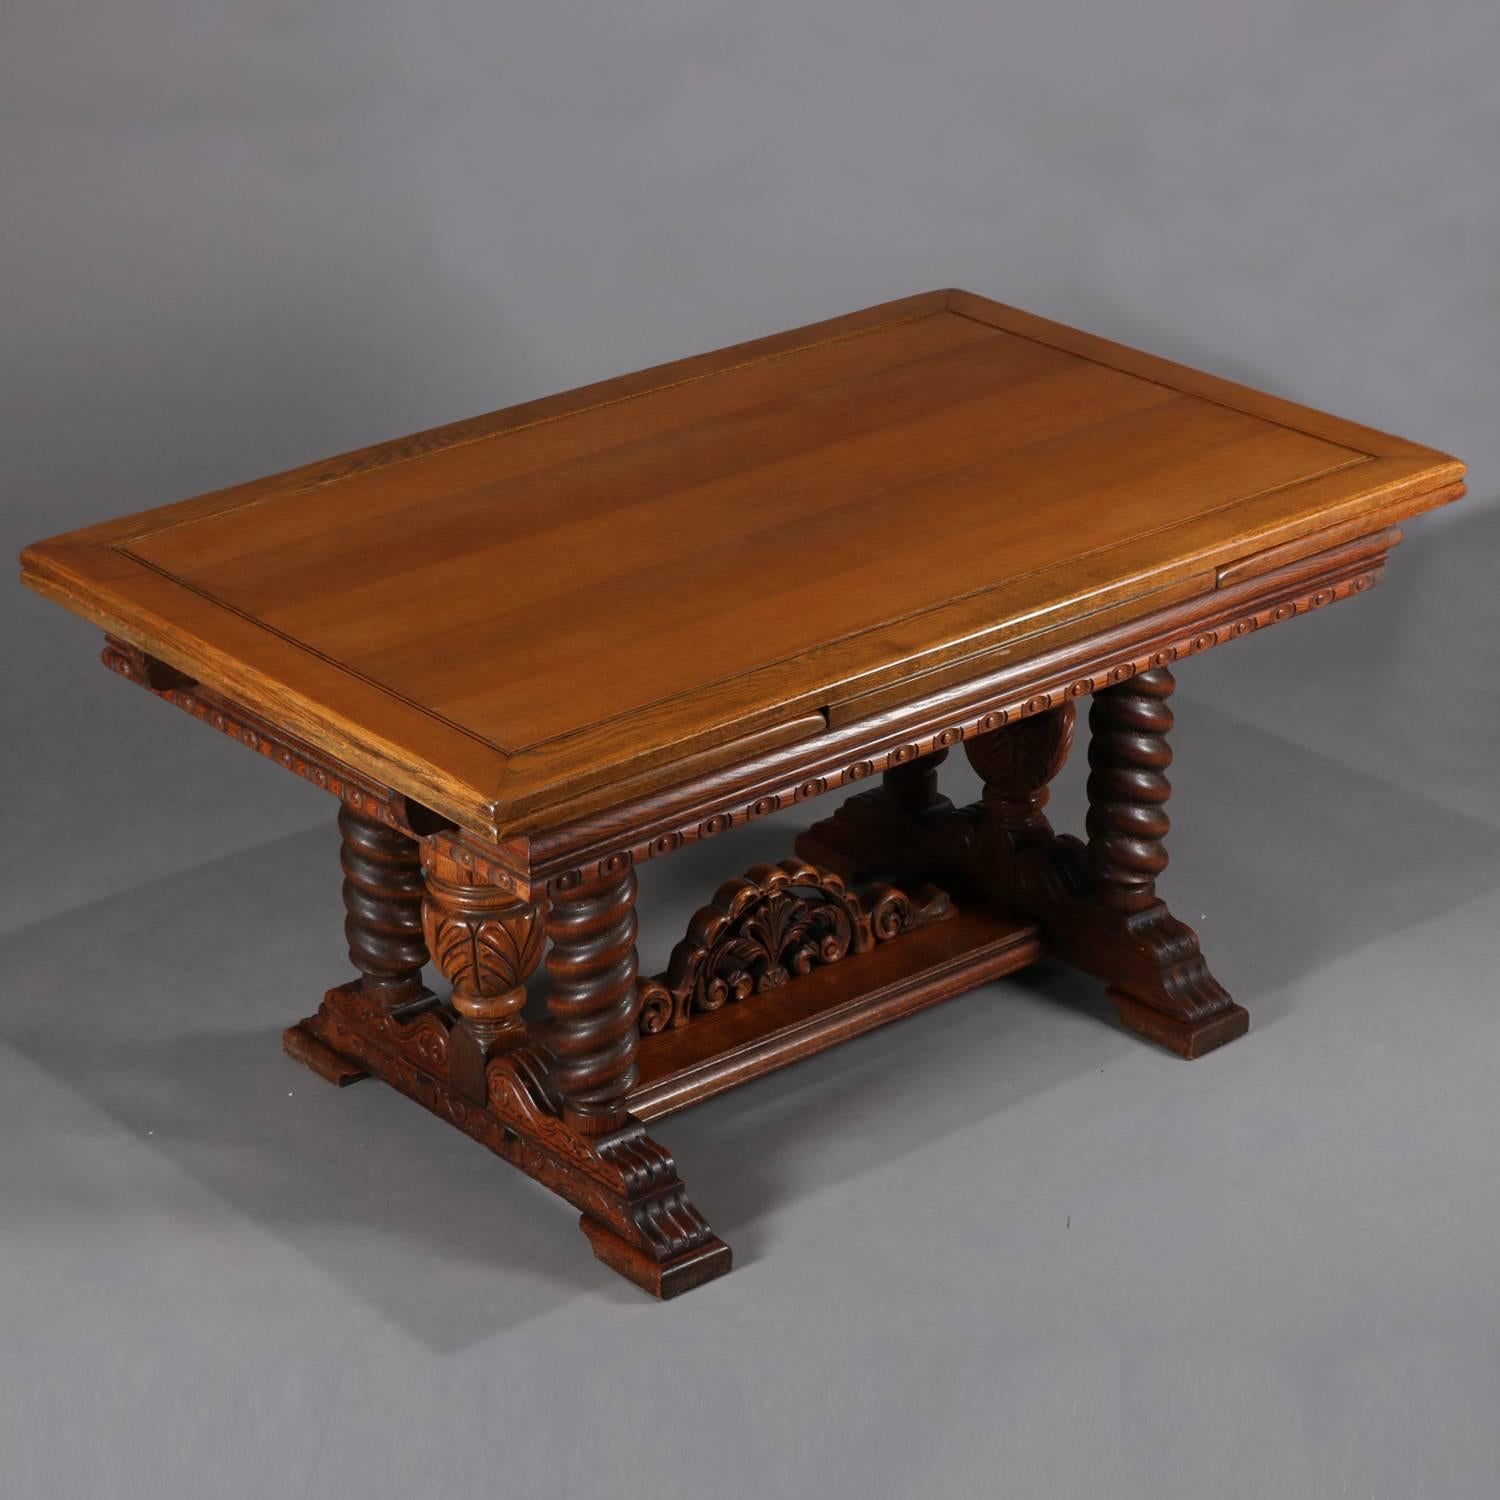 Vintage Jacobean heavily carved oak refractory dining table features heavily carved oak frame with scroll and foliate decoration, top with egg and dart trim over trestle base with central carved acanthus column flanked by carved barley twist